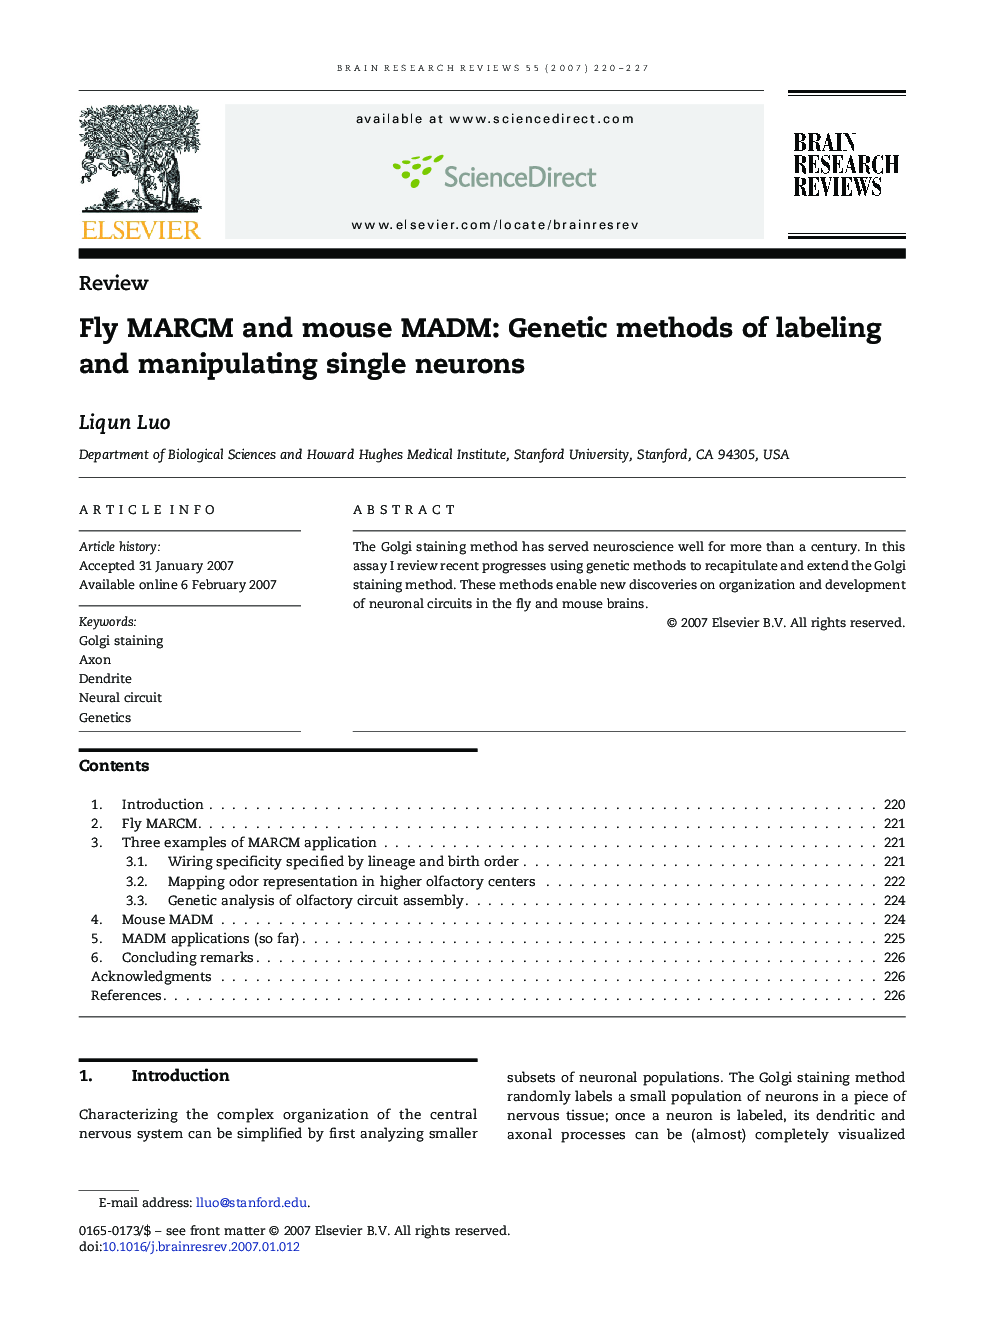 Fly MARCM and mouse MADM: Genetic methods of labeling and manipulating single neurons